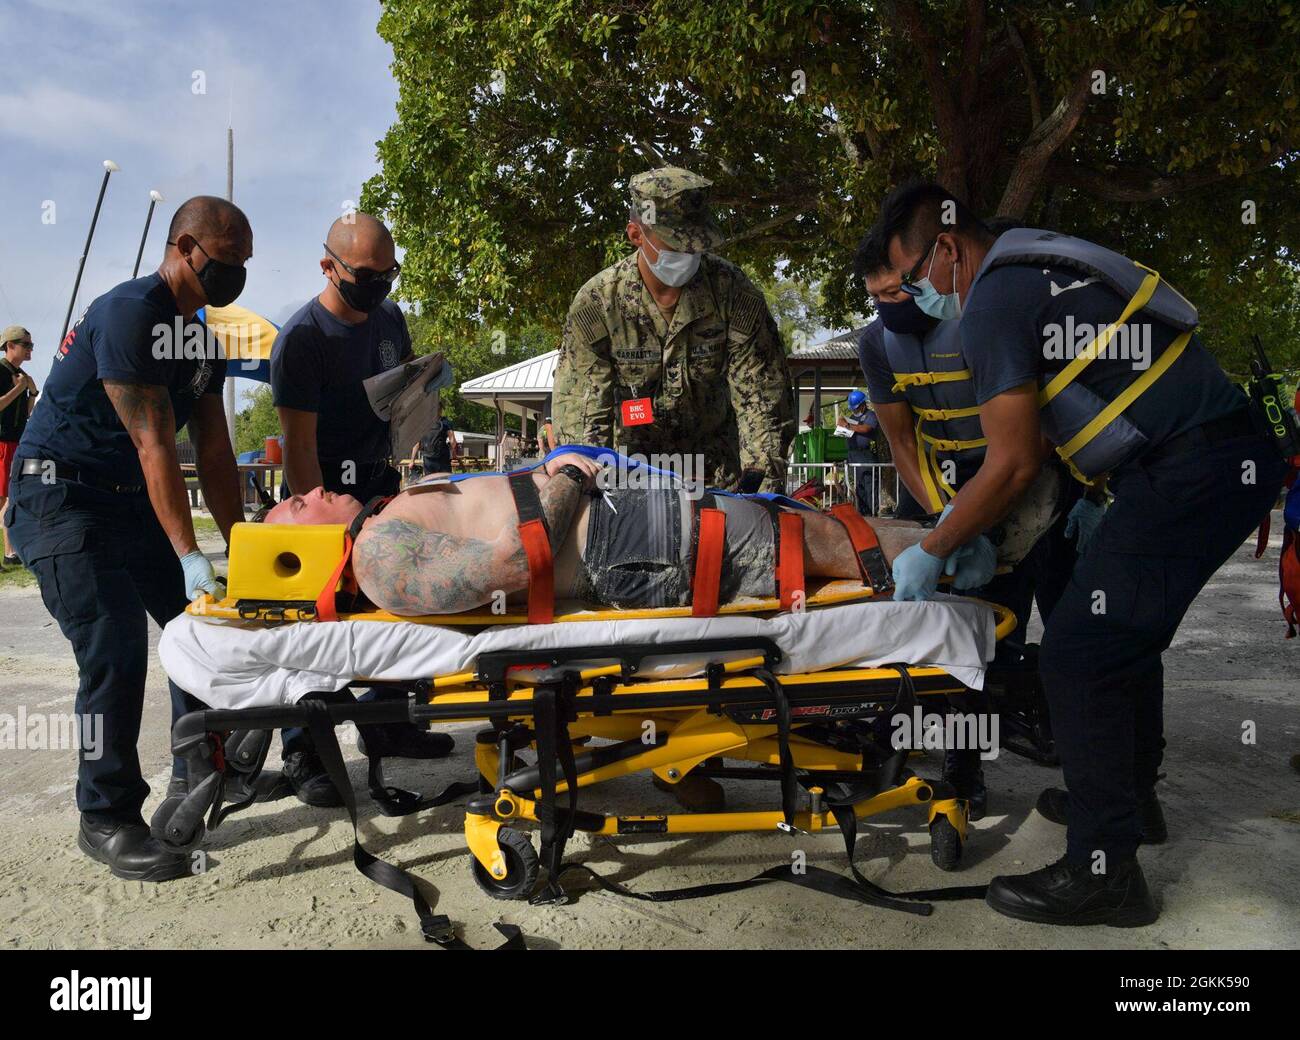 DIEGO GARCIA, British Indian Ocean Territory (May 12, 2021) – U.S. Navy Sailors along with first responders place a wounded shark attack victim on to a gurney during a drill on Diego Garcia, May 12, 2021. U.S. Navy Support Facility Diego Garcia provides logistic, service, recreational and administrative support to U.S. and allied forces forward deployed to the Indian Ocean and Arabian Gulf. Stock Photo